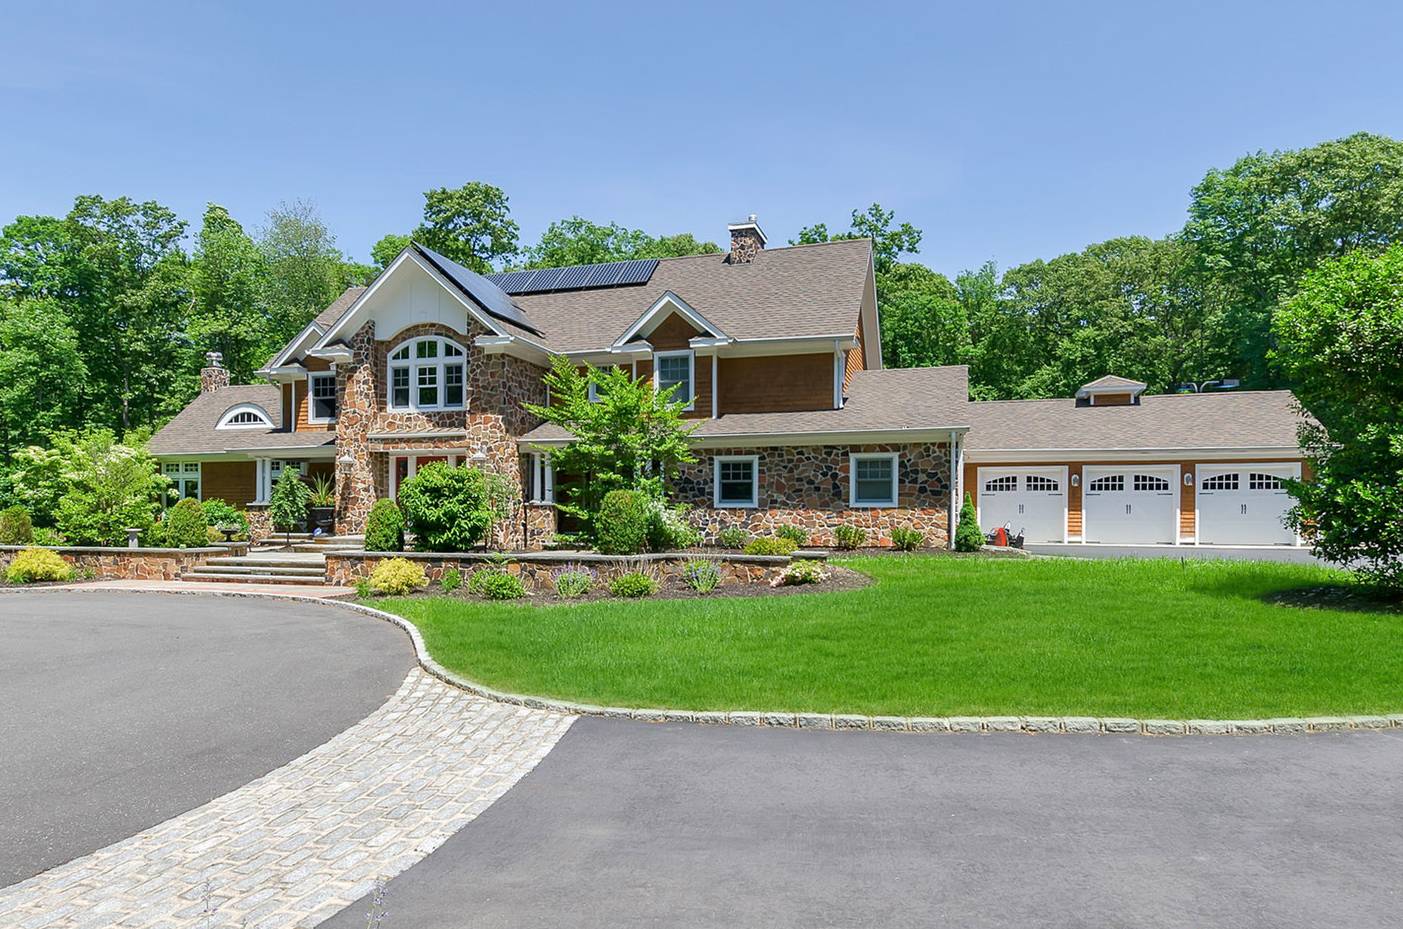 A Family Paradise in Cold Spring Harbor